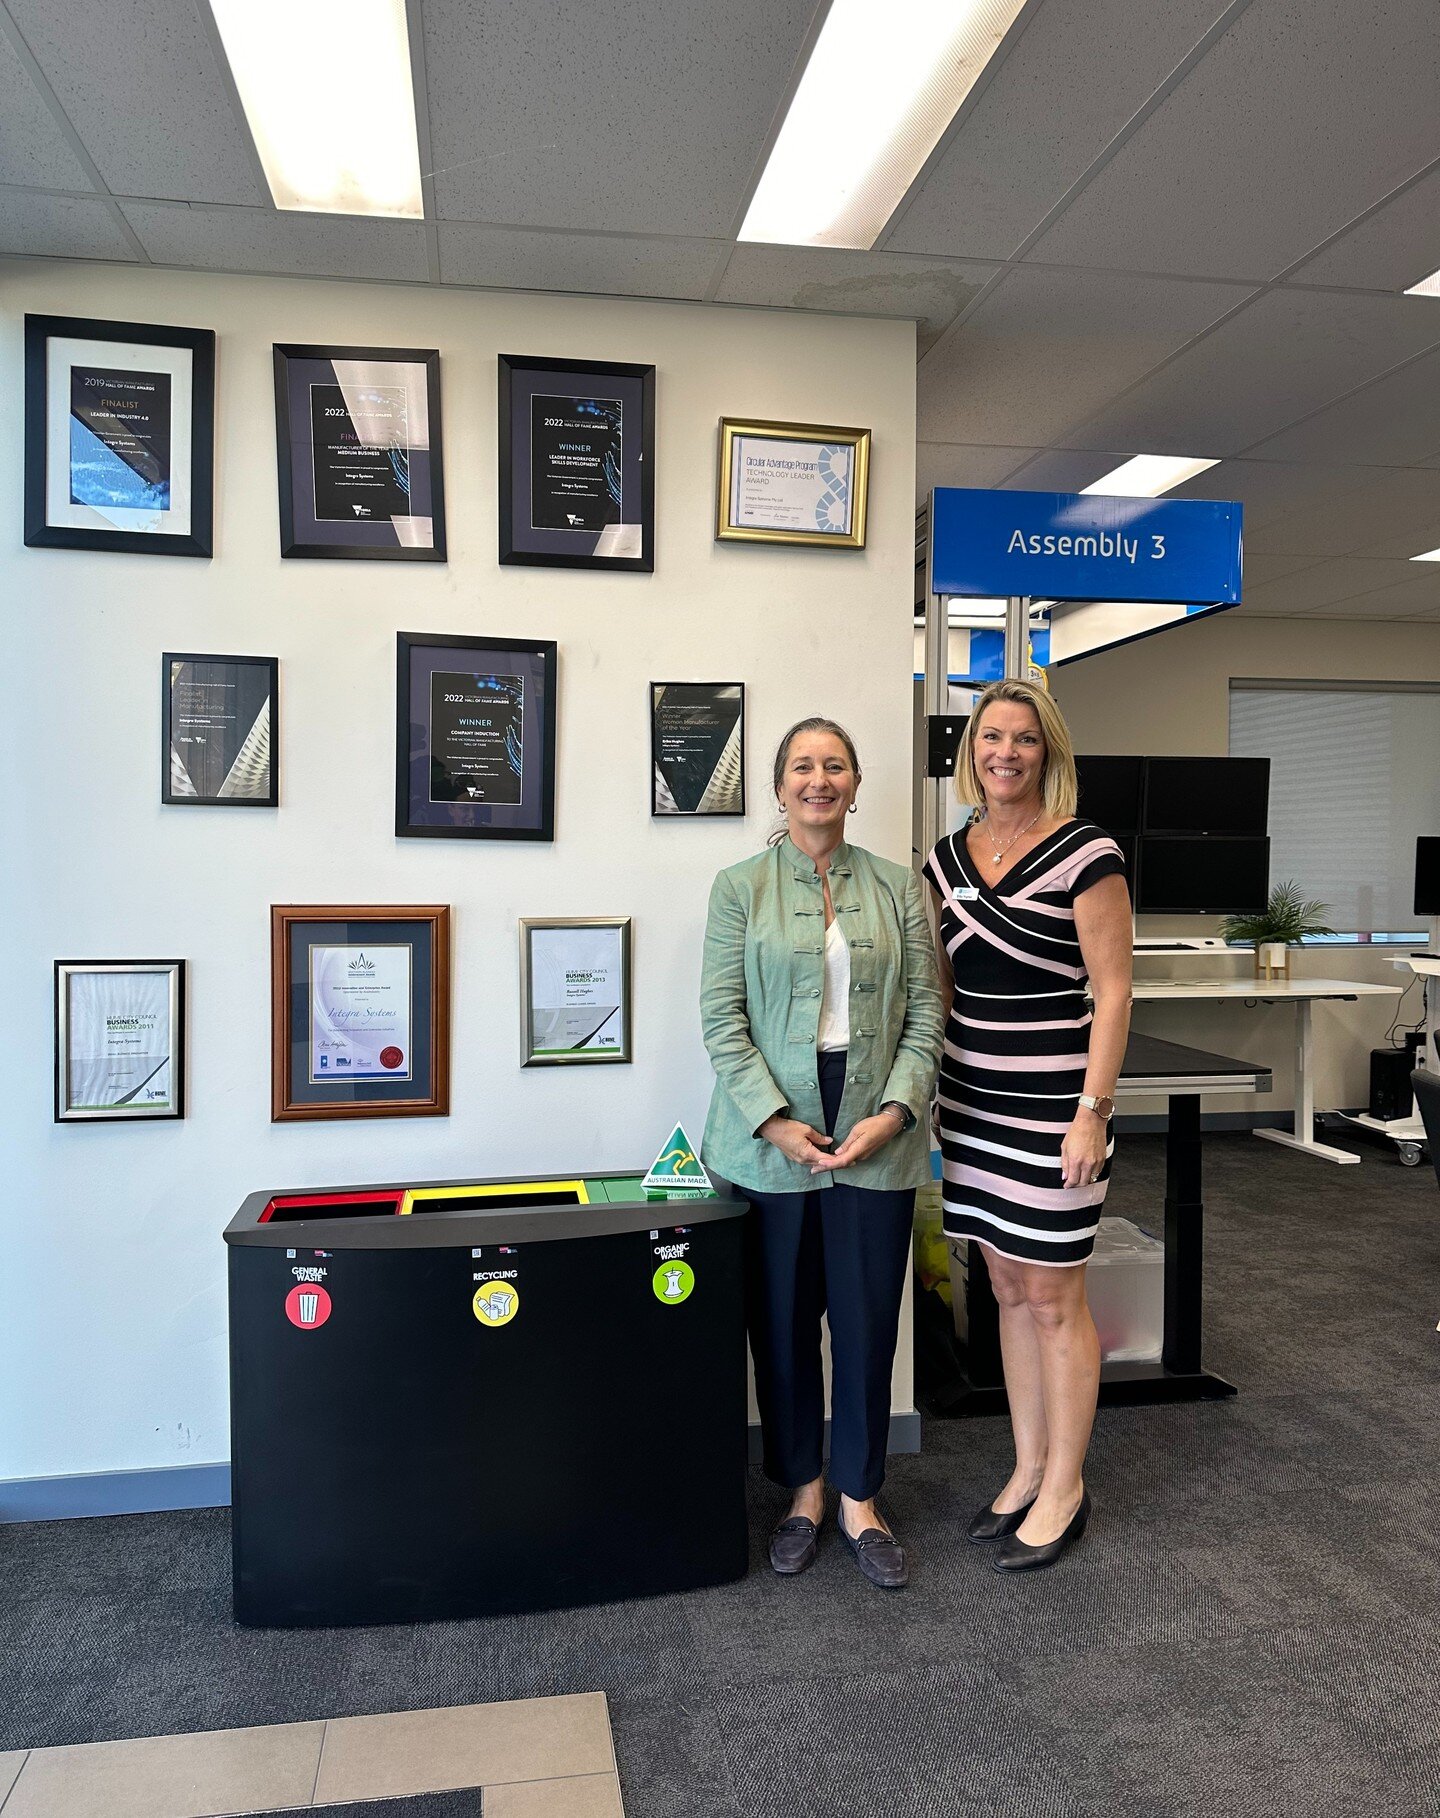 Last Thursday the Dutch Ambassador to Australia H.E. Mrs. Ardi Stoios-Braken paid a visit to Integra to learn more about how we are at the forefront of #circulardesign and #circularmanufacturing in the #australianmanufacturing industry, with our K4.0